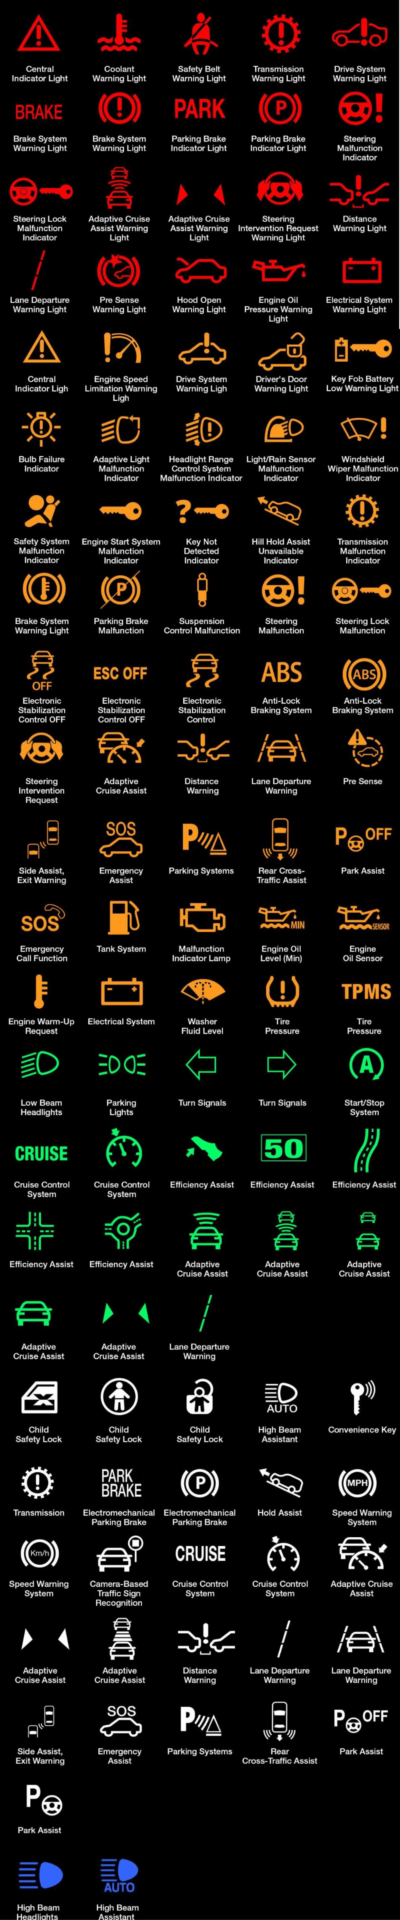 Mercedes dashboard symbols and meanings